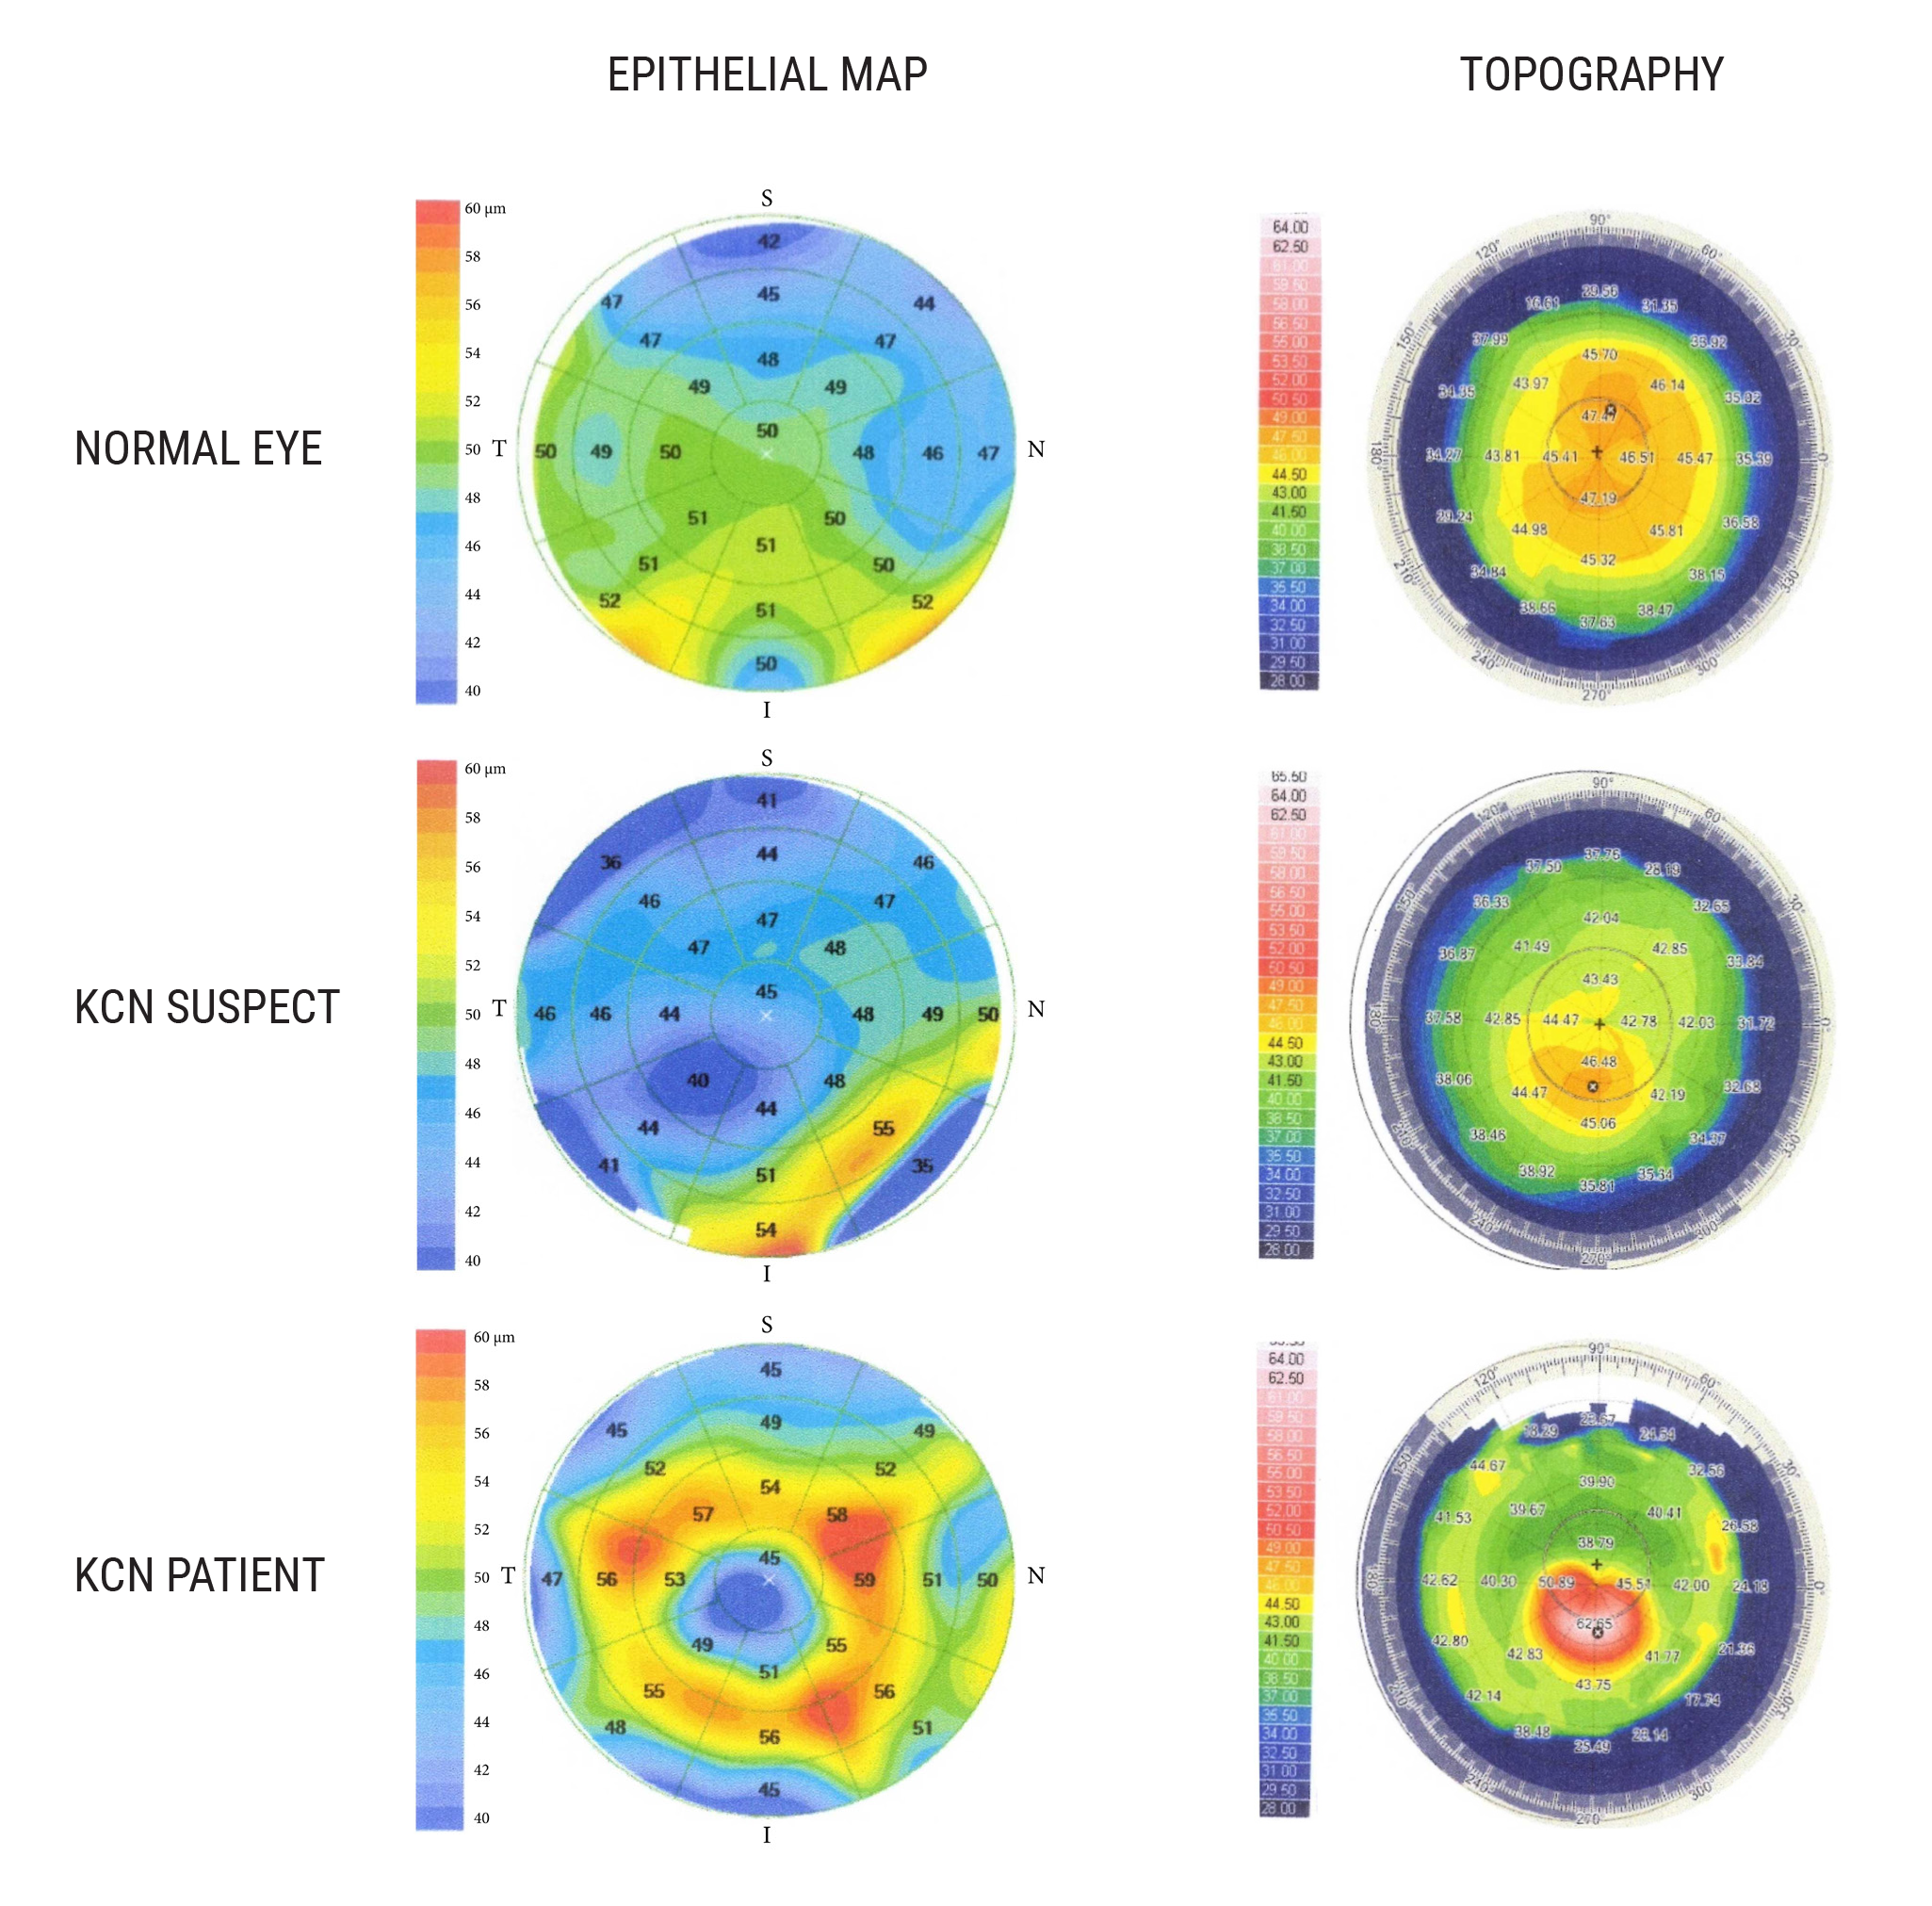 To strengthen the ability of OCT-derived data to detect subclinical keratoconus, researchers suggest that coupling epithelial thickness profiles with corneal tomography may prove beneficial in future studies.